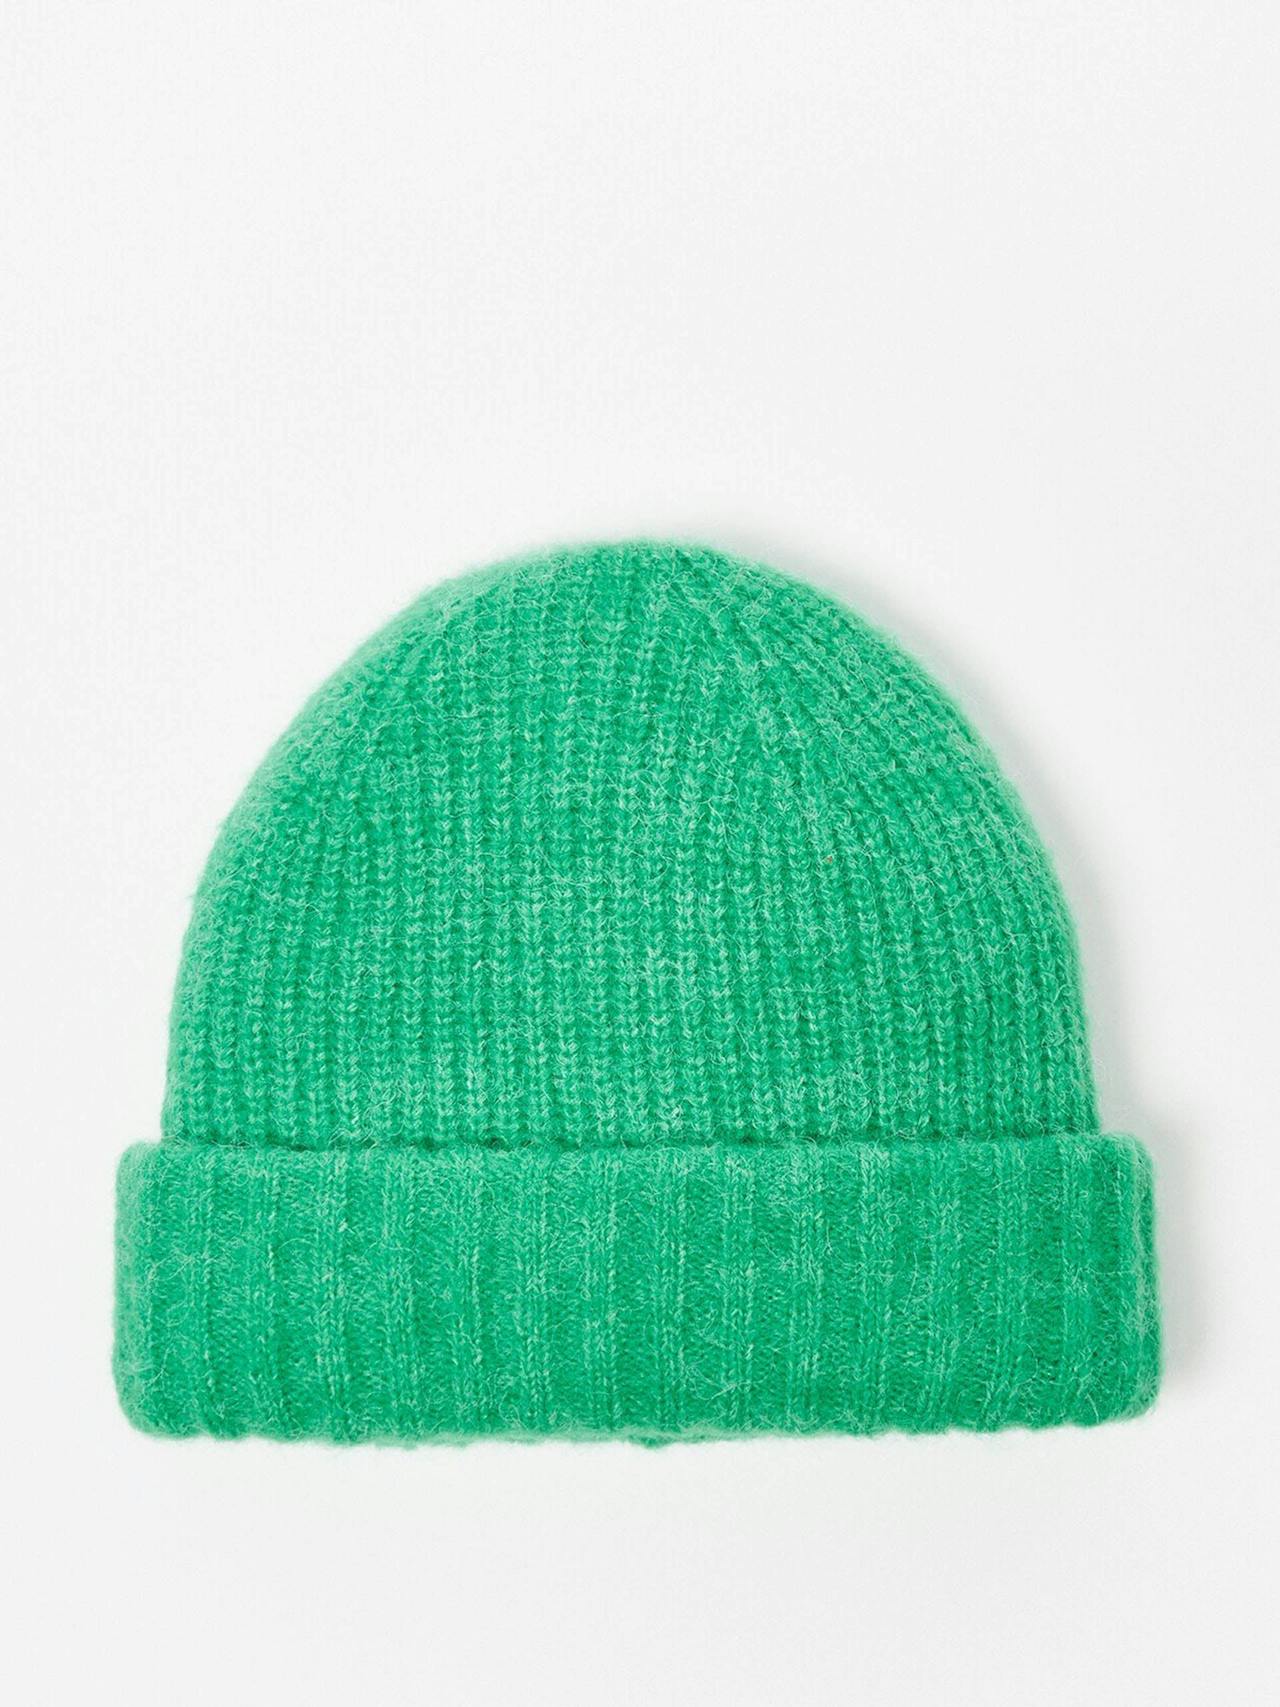 Double rib green knitted beanie hat